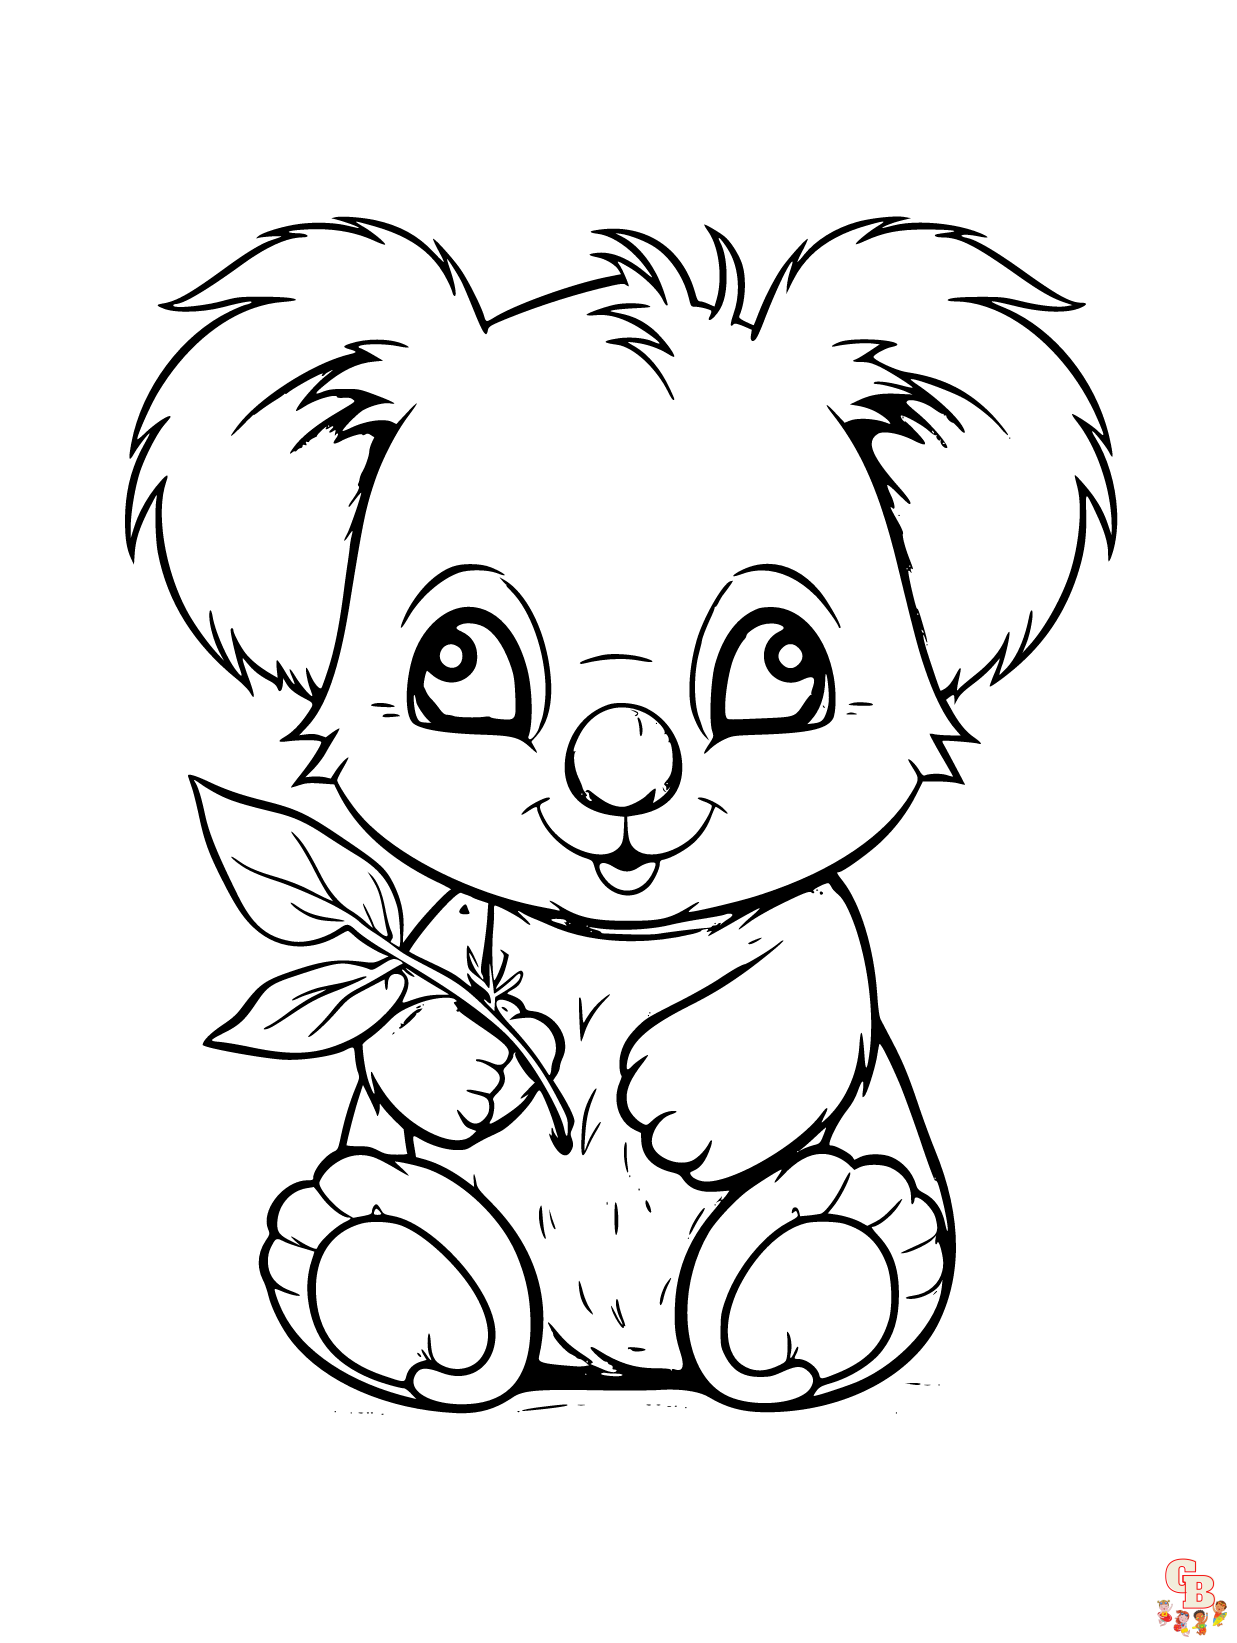 Koala coloring pages free